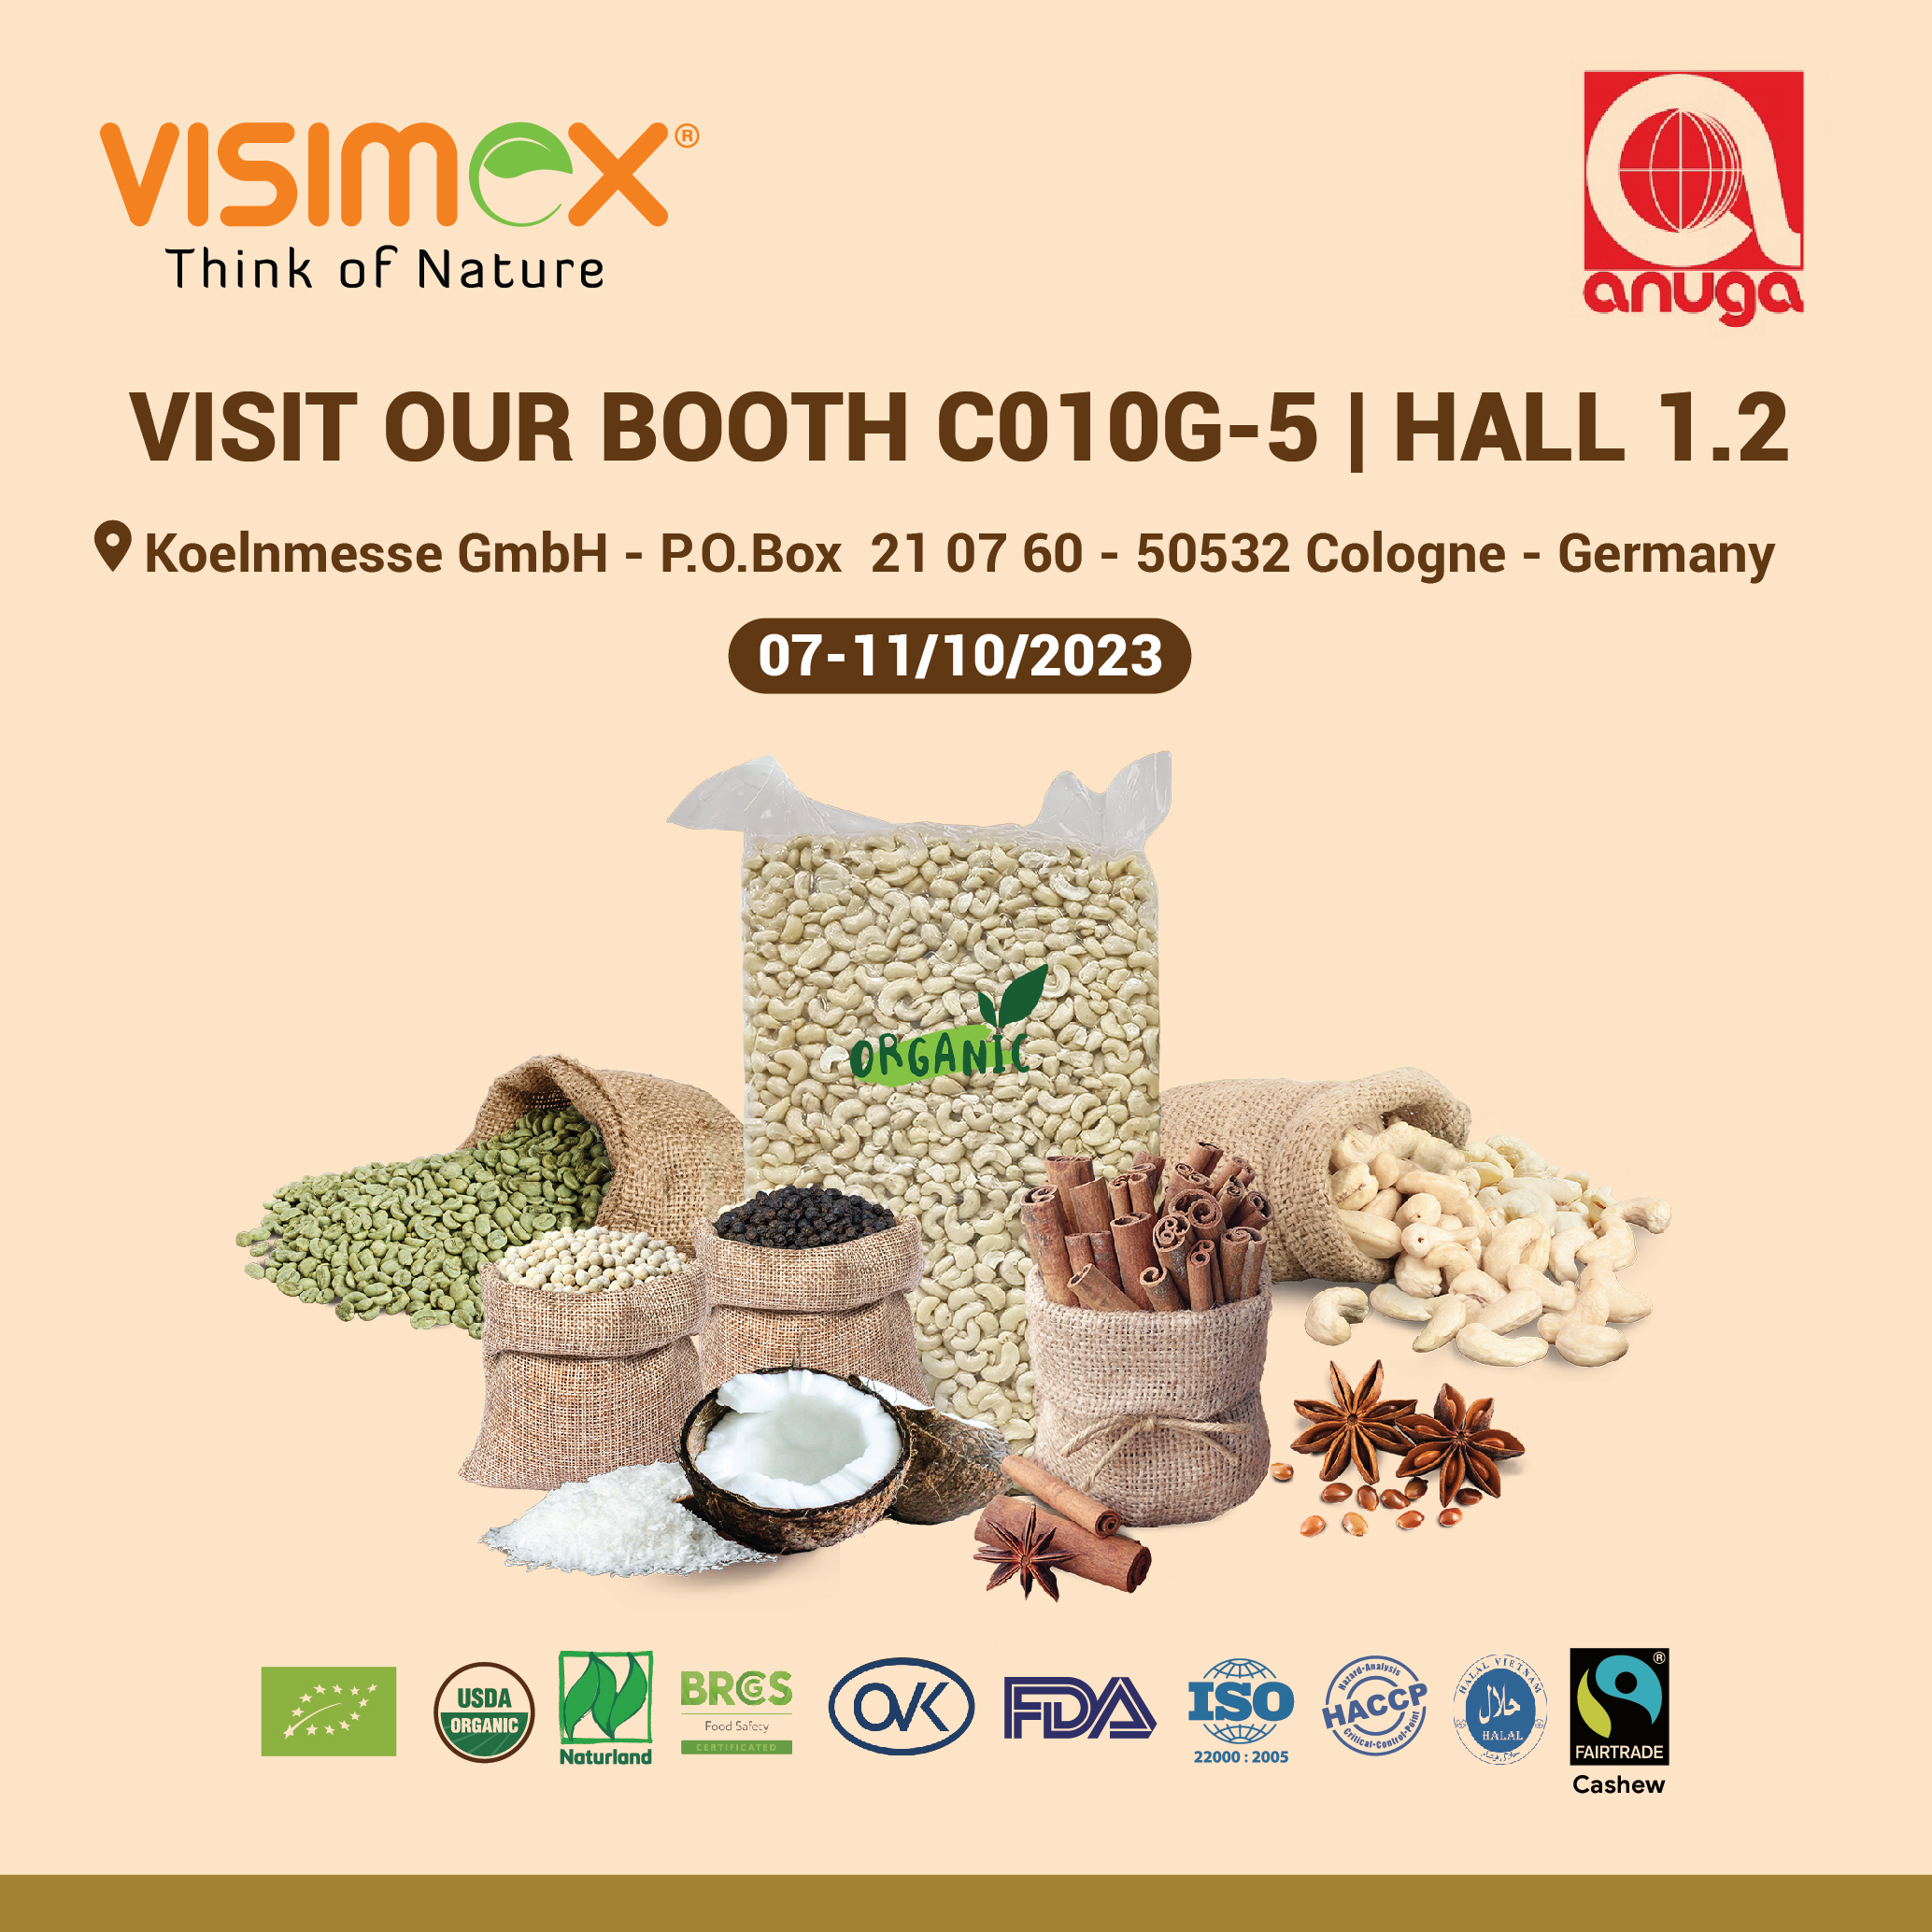 Visimex - Vietnam's Agricultural Representative to Attend Anuga 2023 - The World's Largest Food Fair